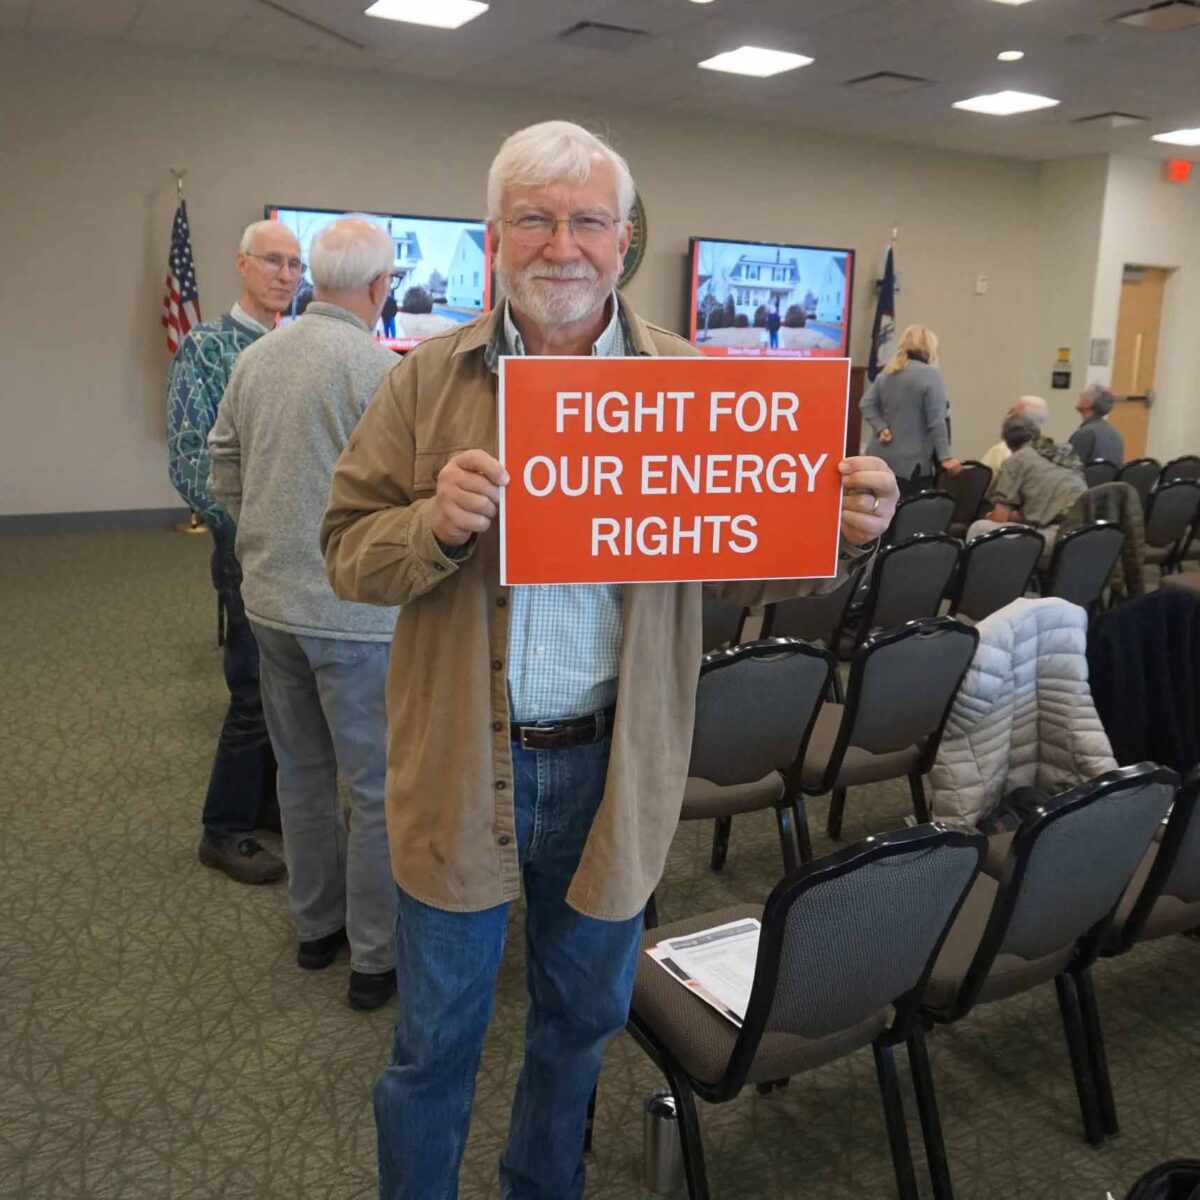 Older gentleman in glasses holding a sign that reads "Fight for our energy rights."